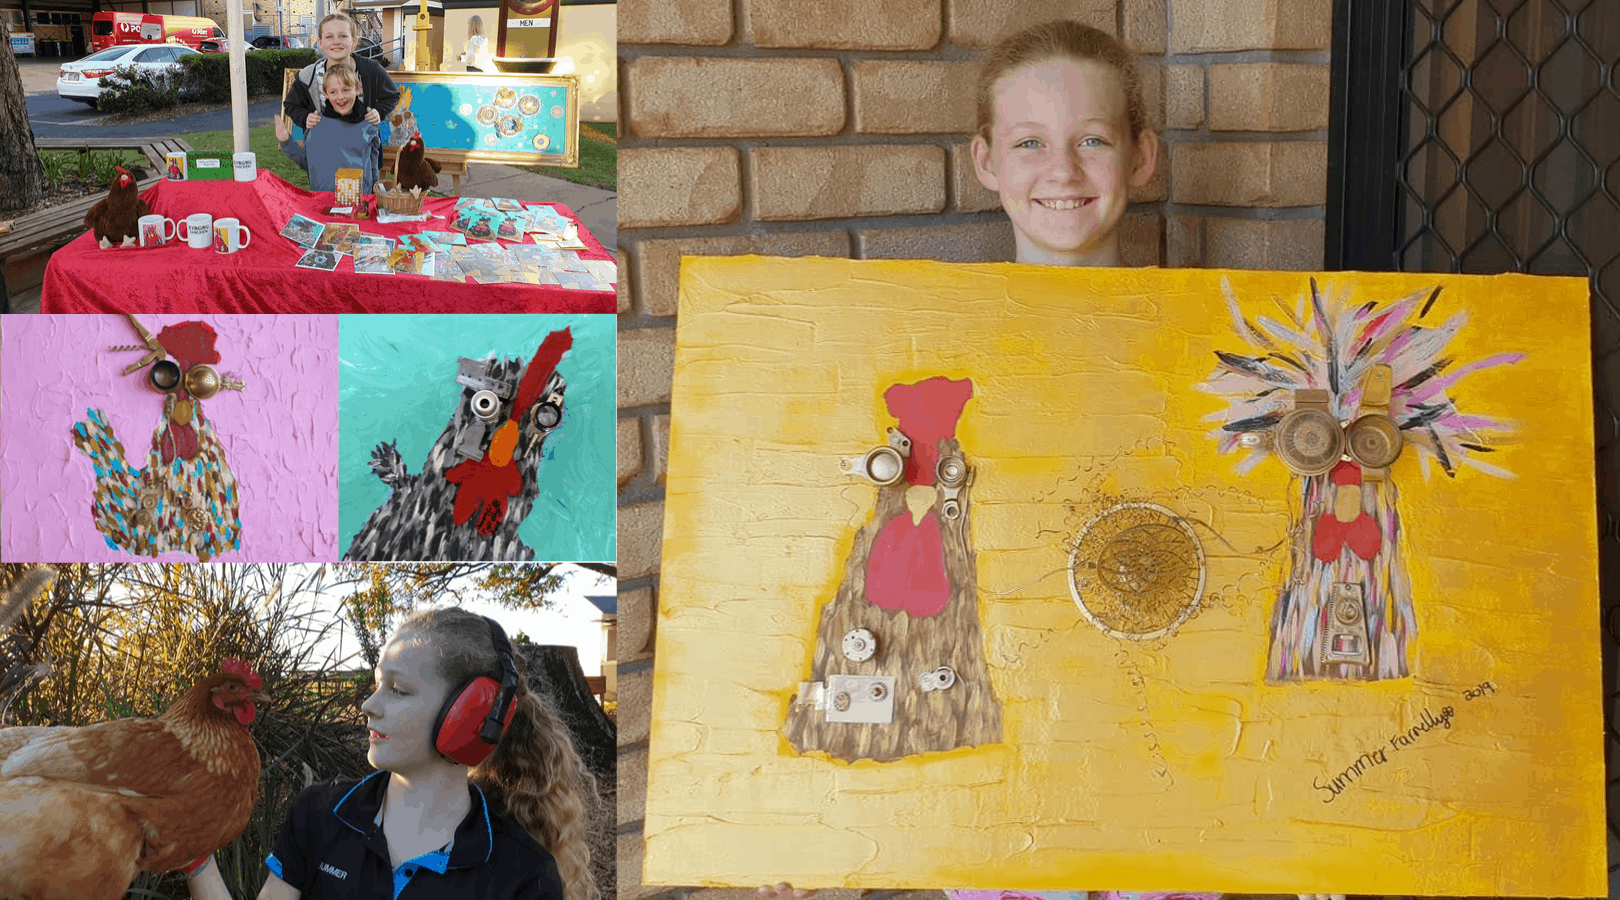 Collage of images featuring 12 year old artist Summer Farrelly and three of her artworks of cyborg chickens